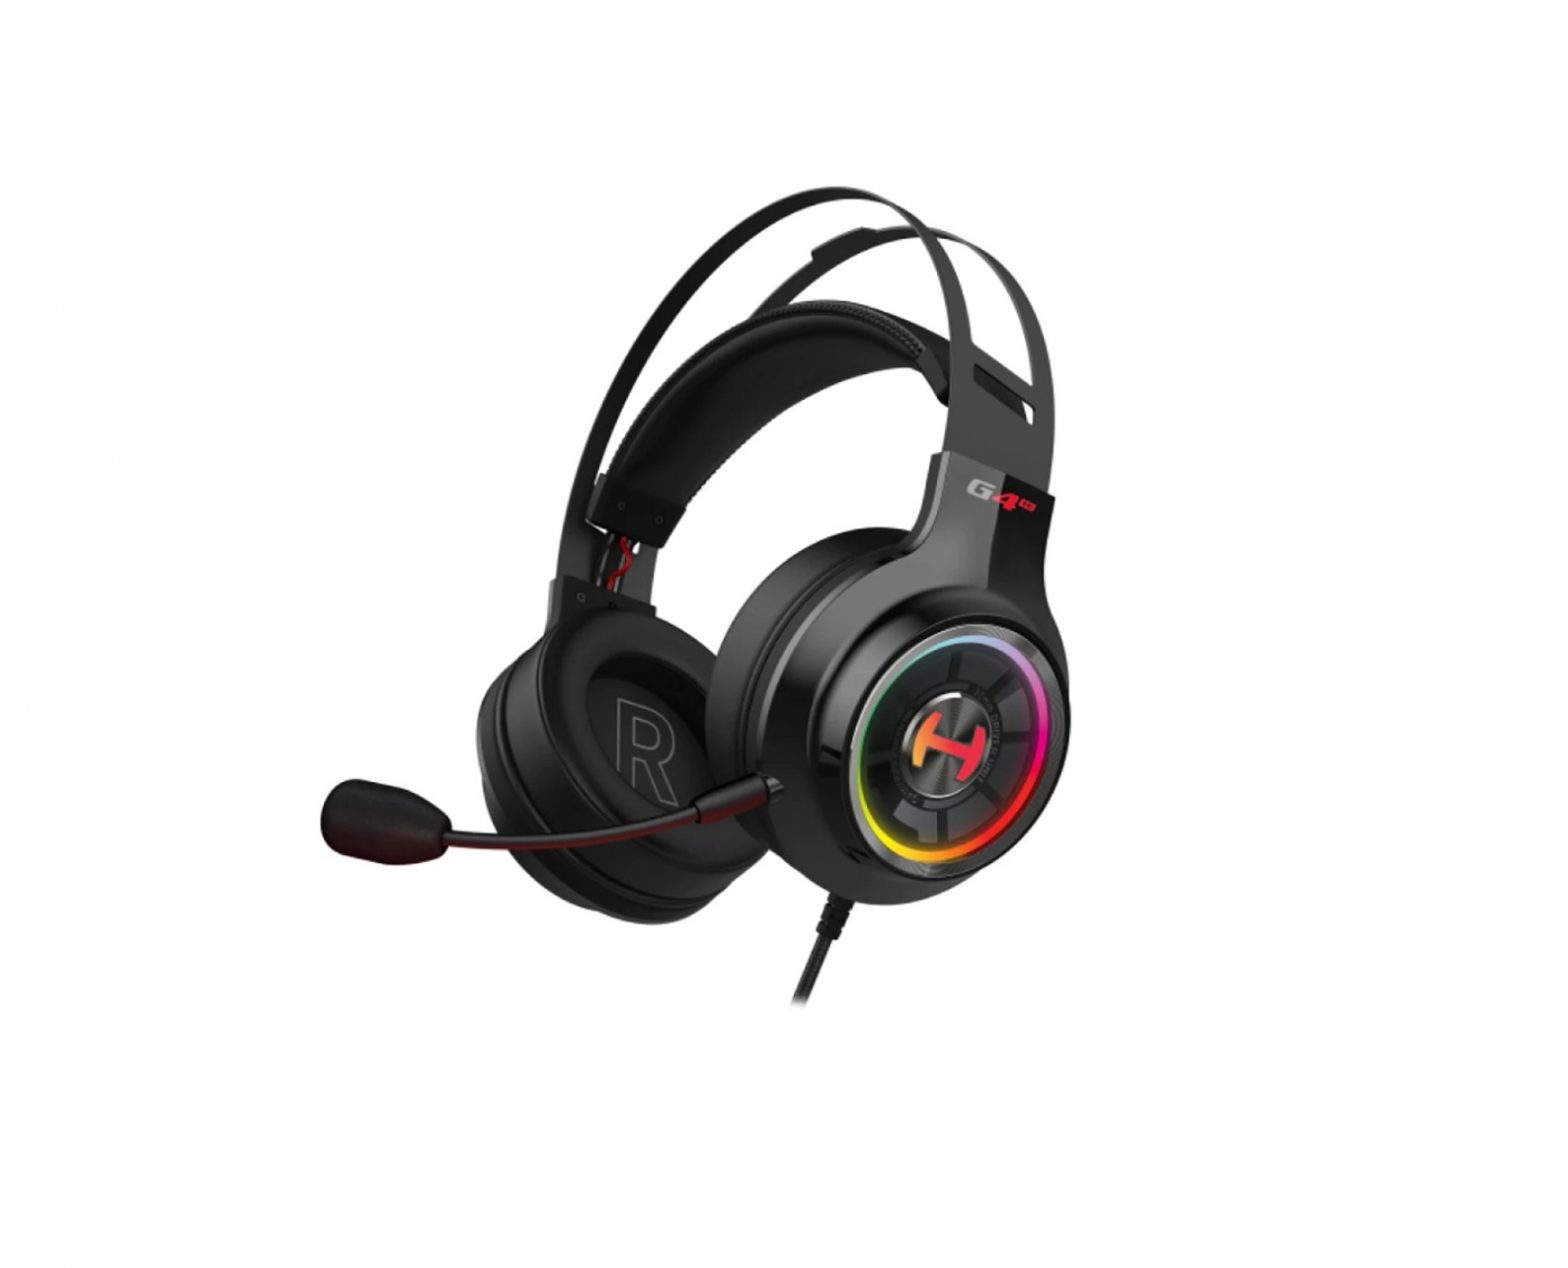 EDIFIER 7.1 Surround Sound USB Gaming Headset User Guide